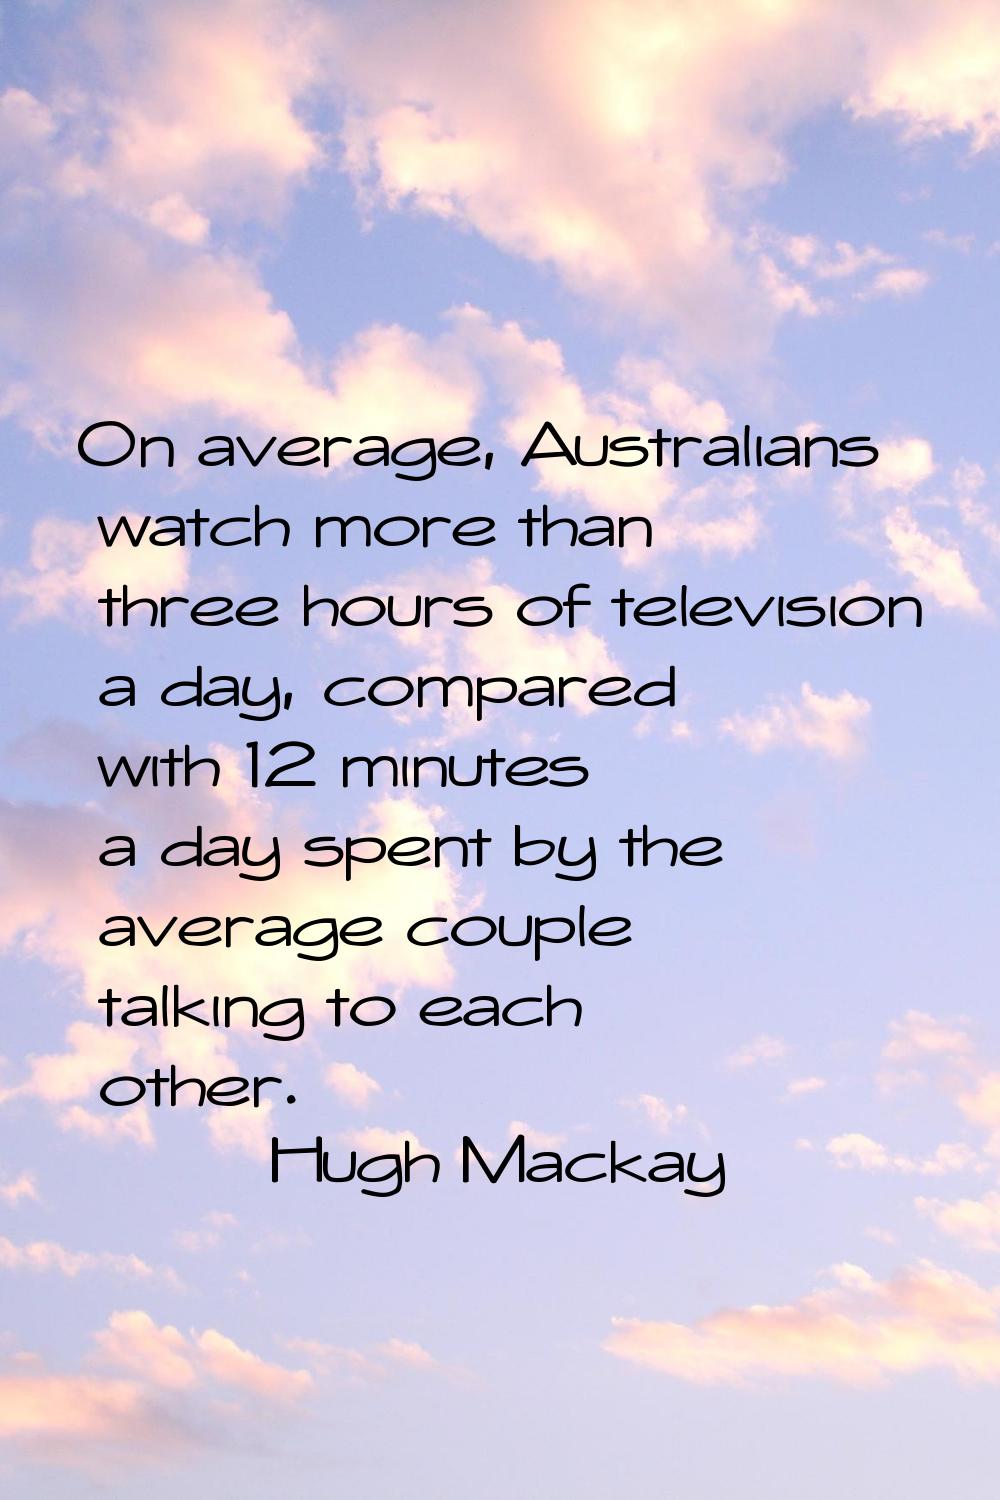 On average, Australians watch more than three hours of television a day, compared with 12 minutes a